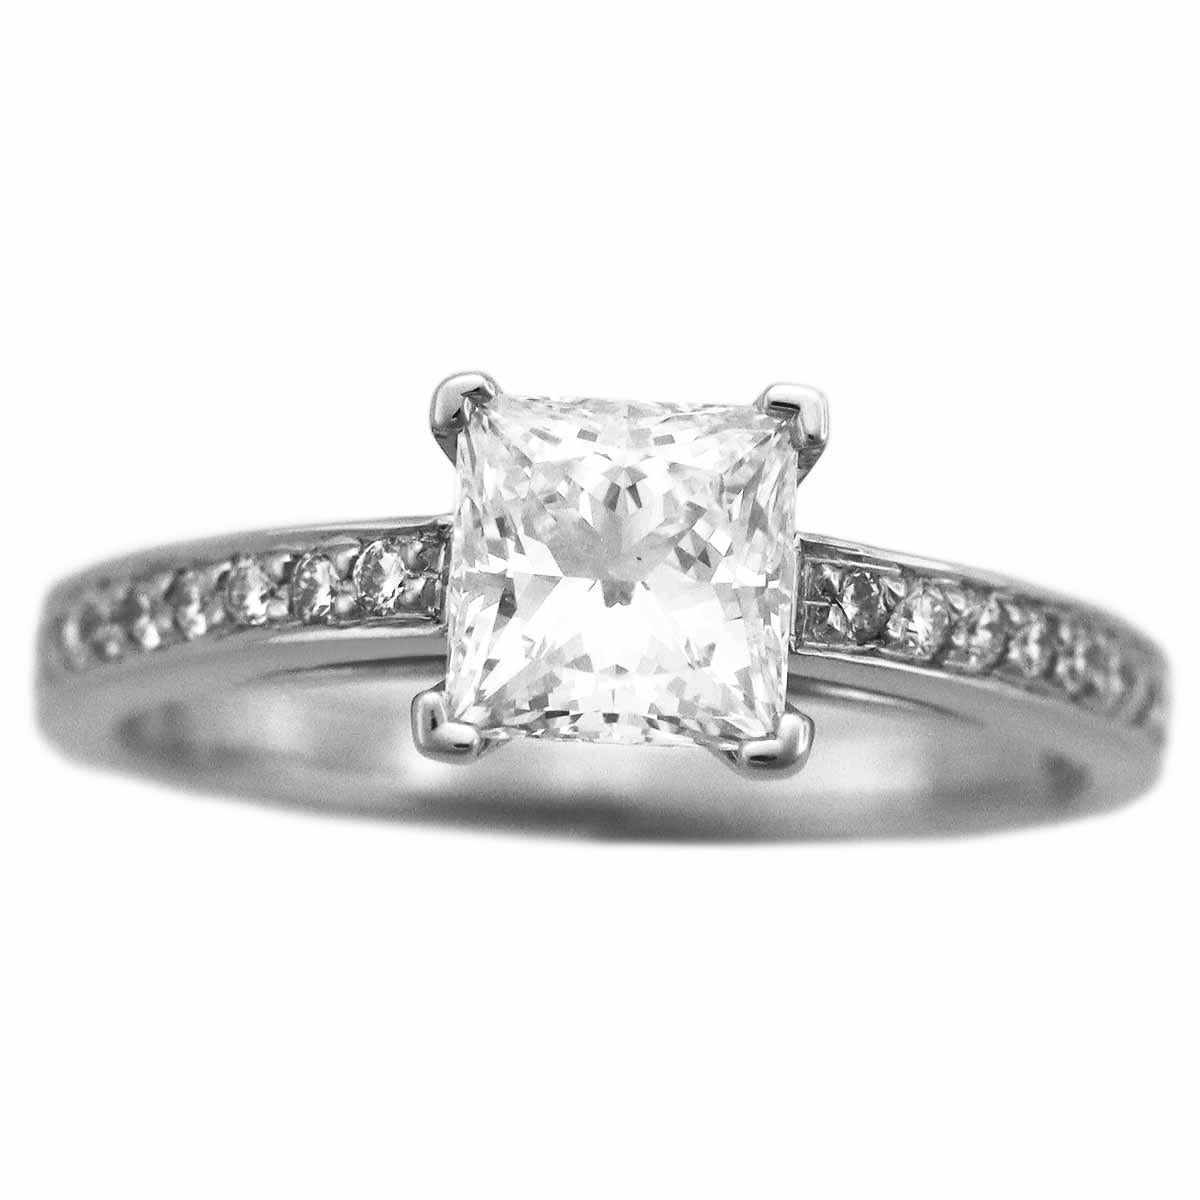 Brand:TIFFANY&Co.
Name:TIFFANY Grace Ring
Material :1P diamond (D0.85ct F-VVS2), side diamond, Pt950 Platinum
Comes with:Tiffany box, case, T&Co. certificate 
Ring size:British & Australian:I 1/2  /   US & Canada:4.25 /  French & Russian:48 / 